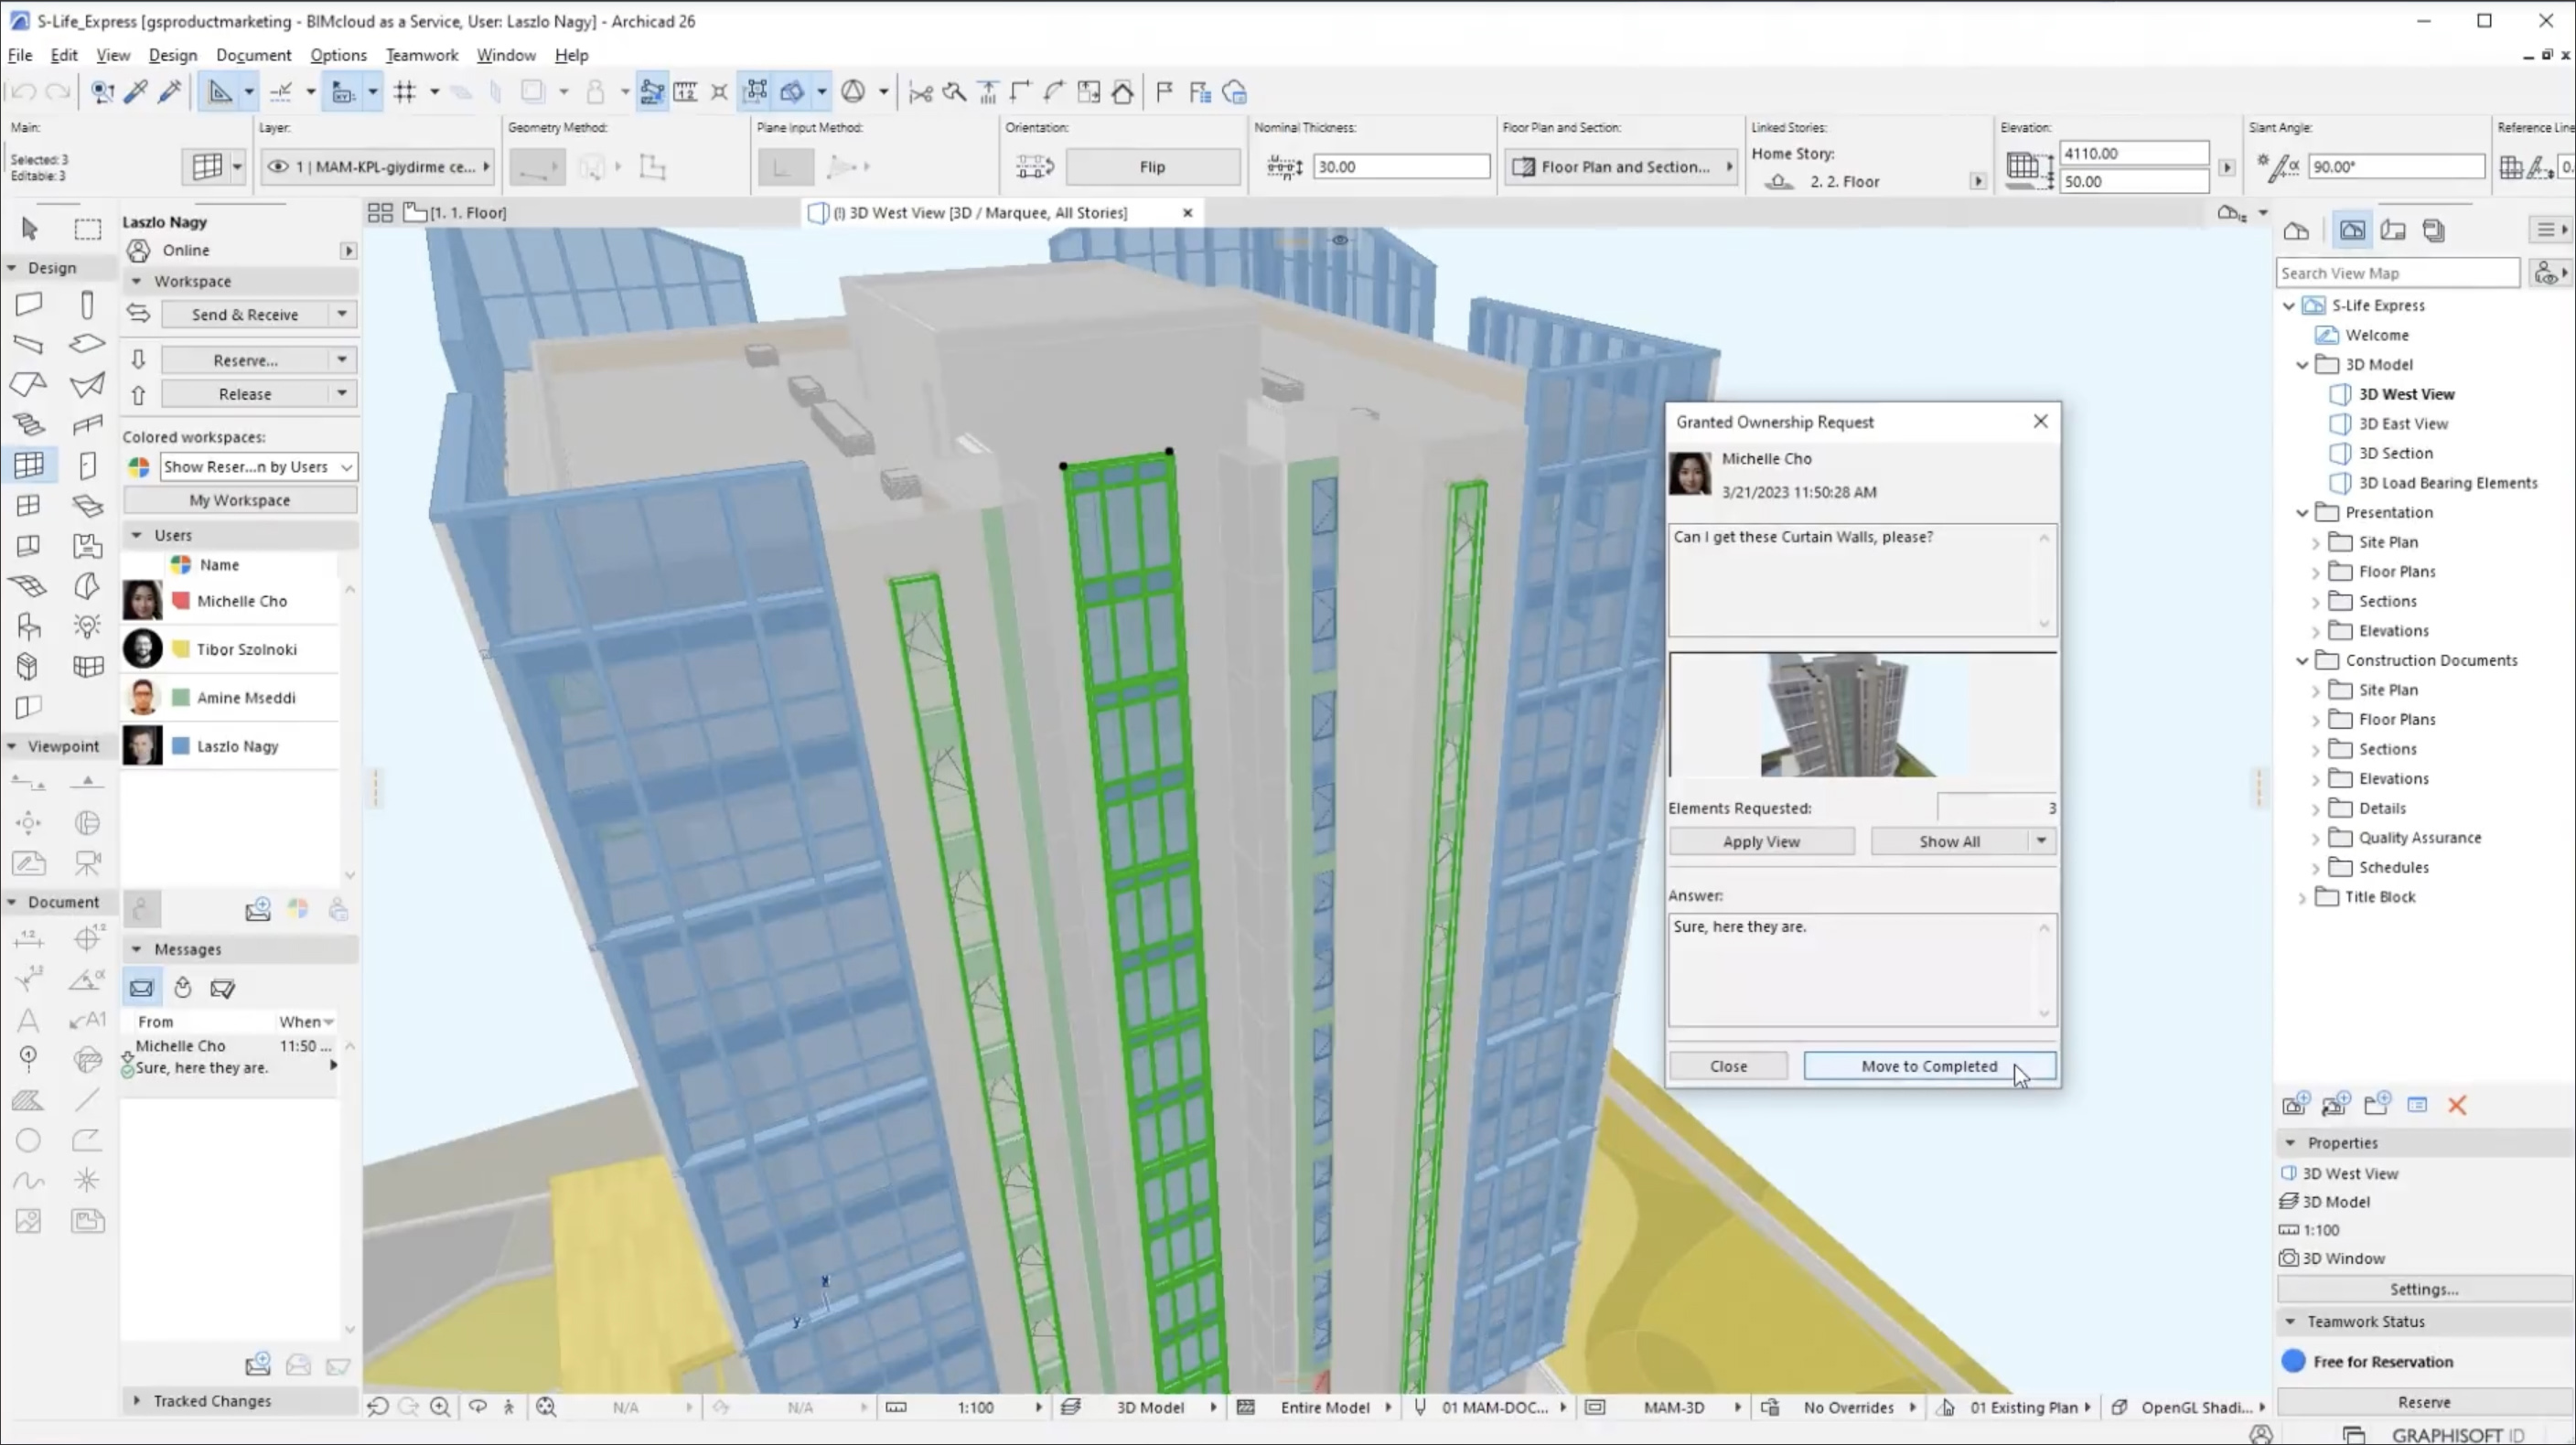 Archicad Interface with Teamwork Palette and Teamwork Messaging Panel